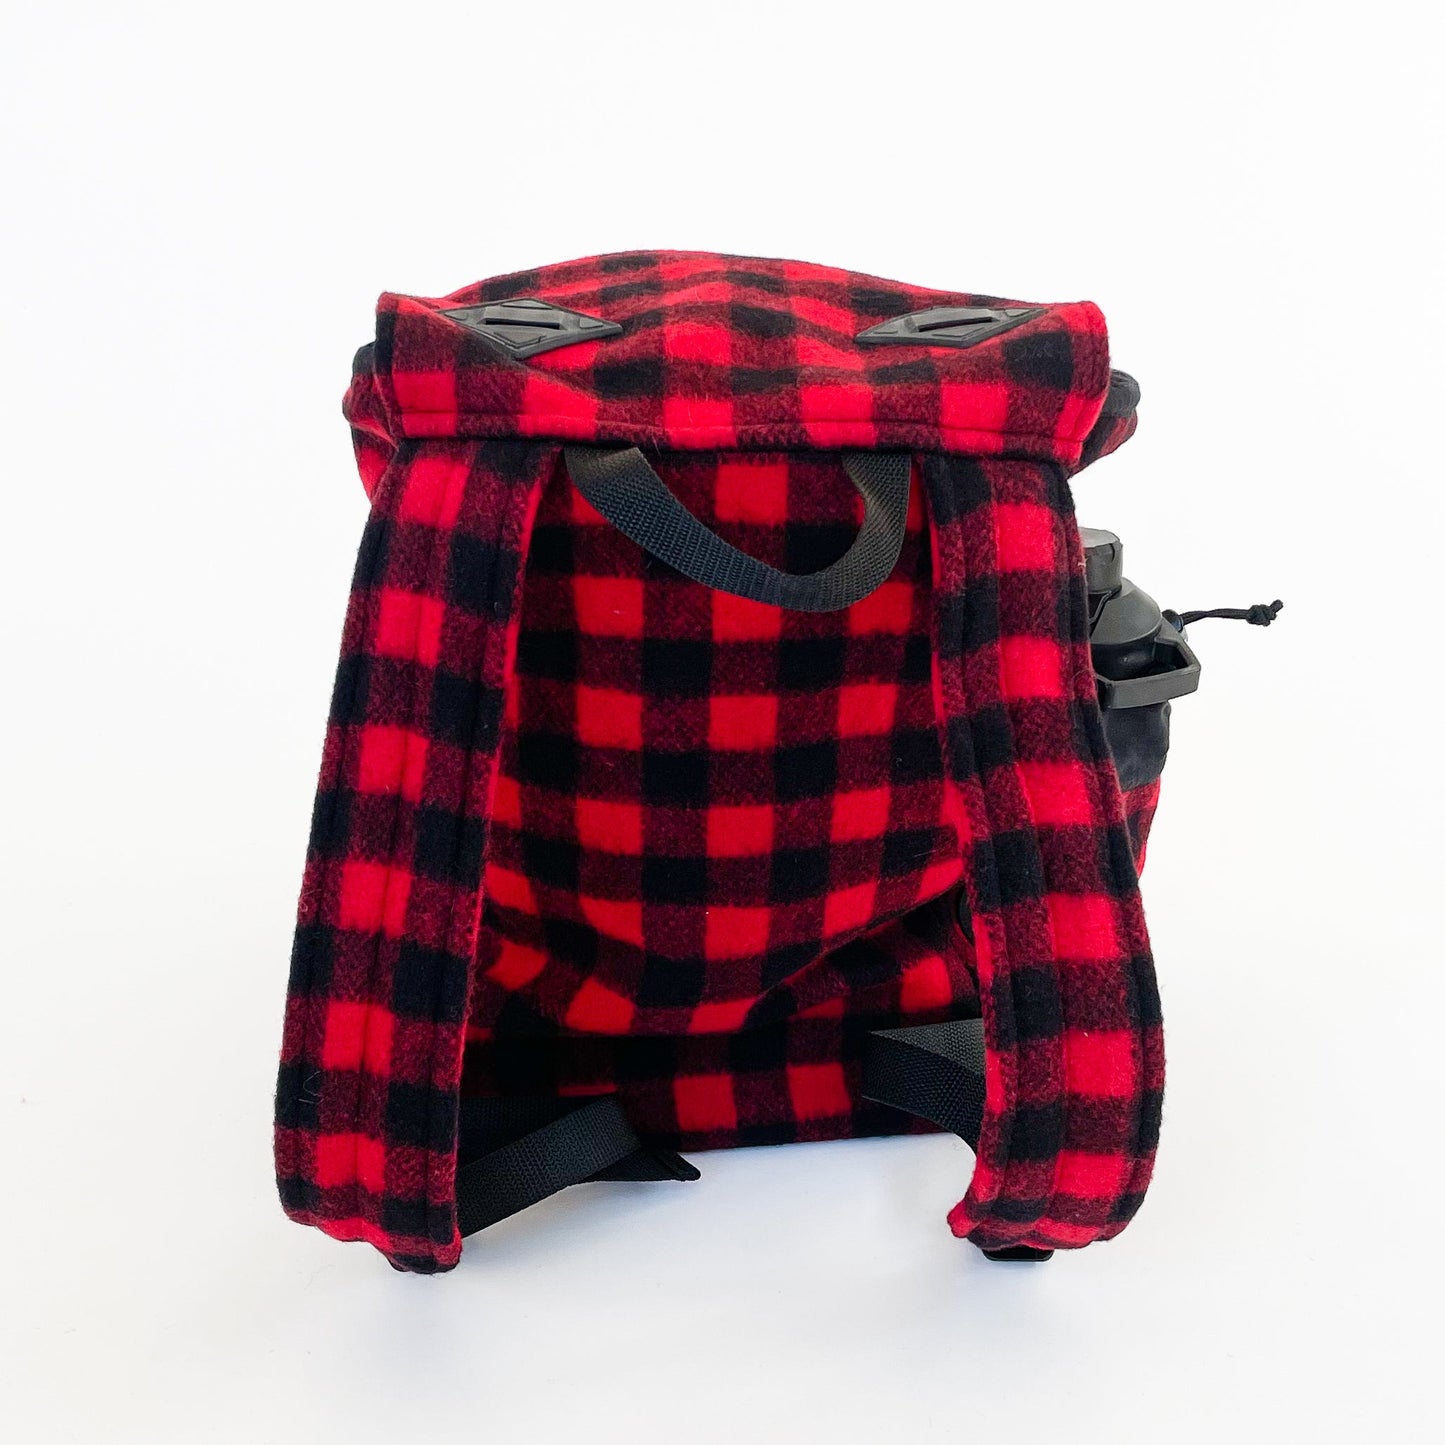 Wool back pack red and black buffalo plaid, shown with water bottle in side pocket - back view